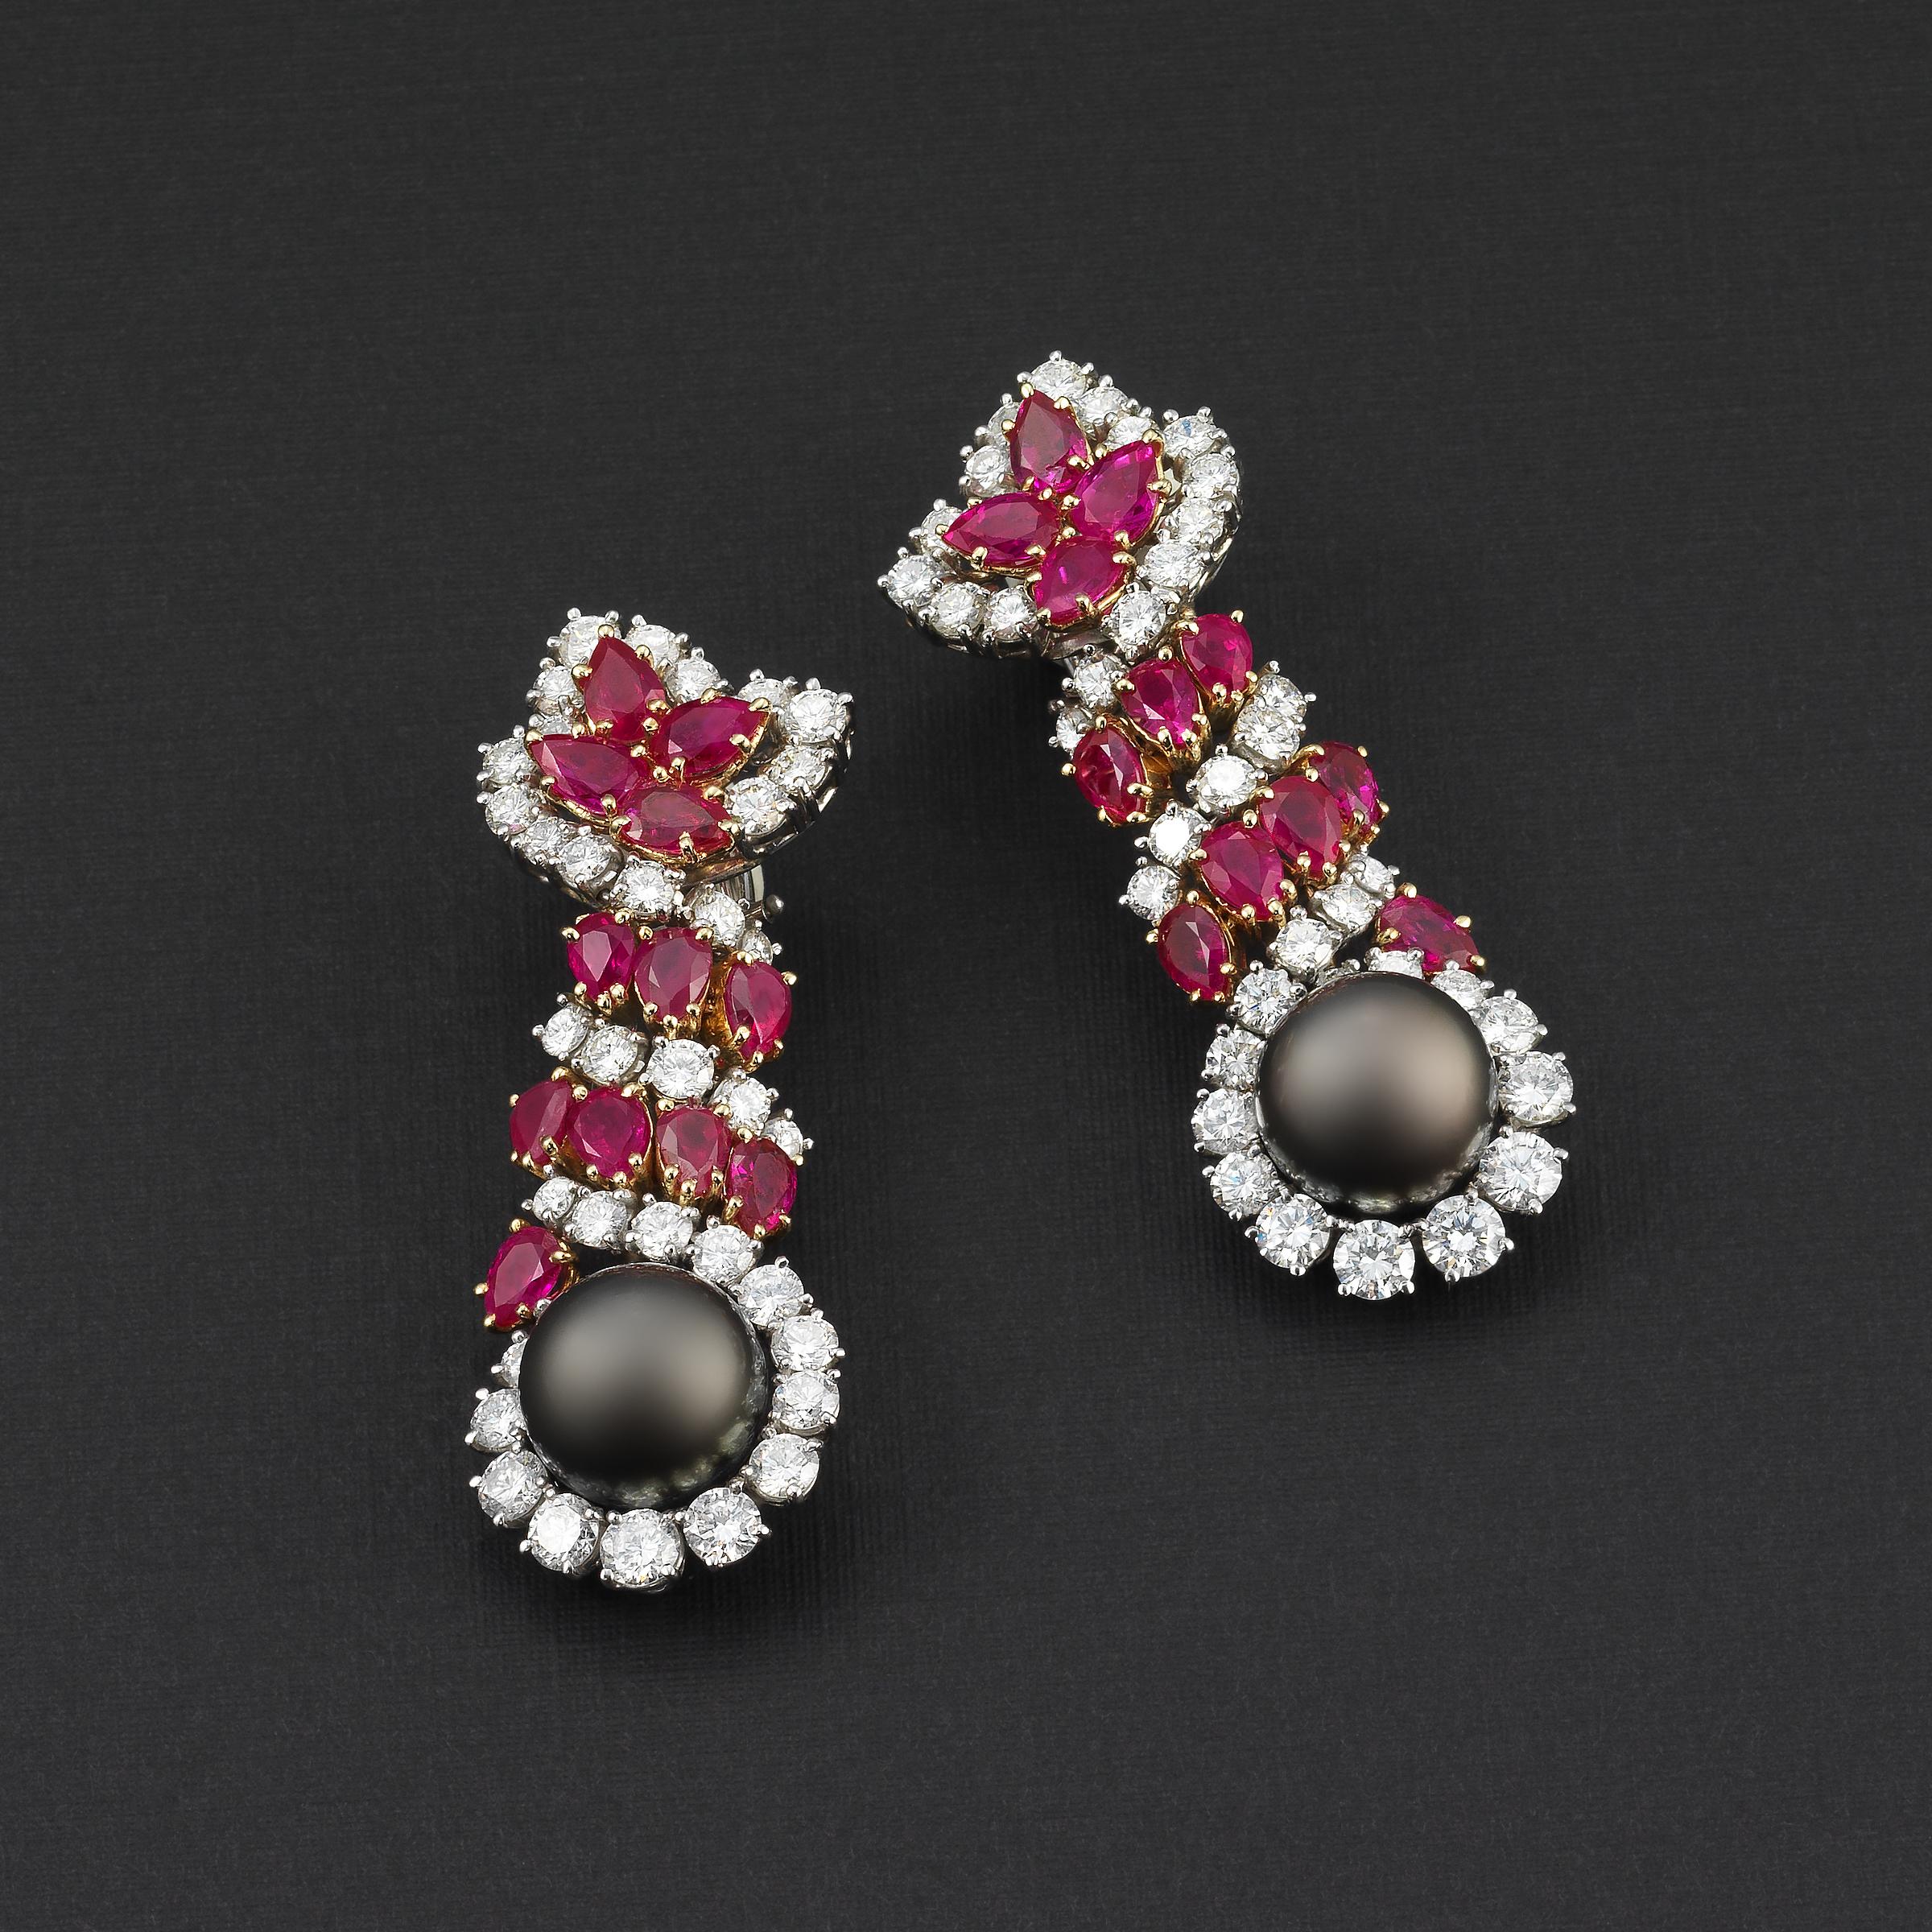 Harry Winston one-of-a-kind earrings and ring radiating 1970s glamour and showcasing fine white diamonds and vivid red Burma no-heat rubies along with eye-catching round Tahitian black pearls that complete a bold design. 
Earrings details:
-